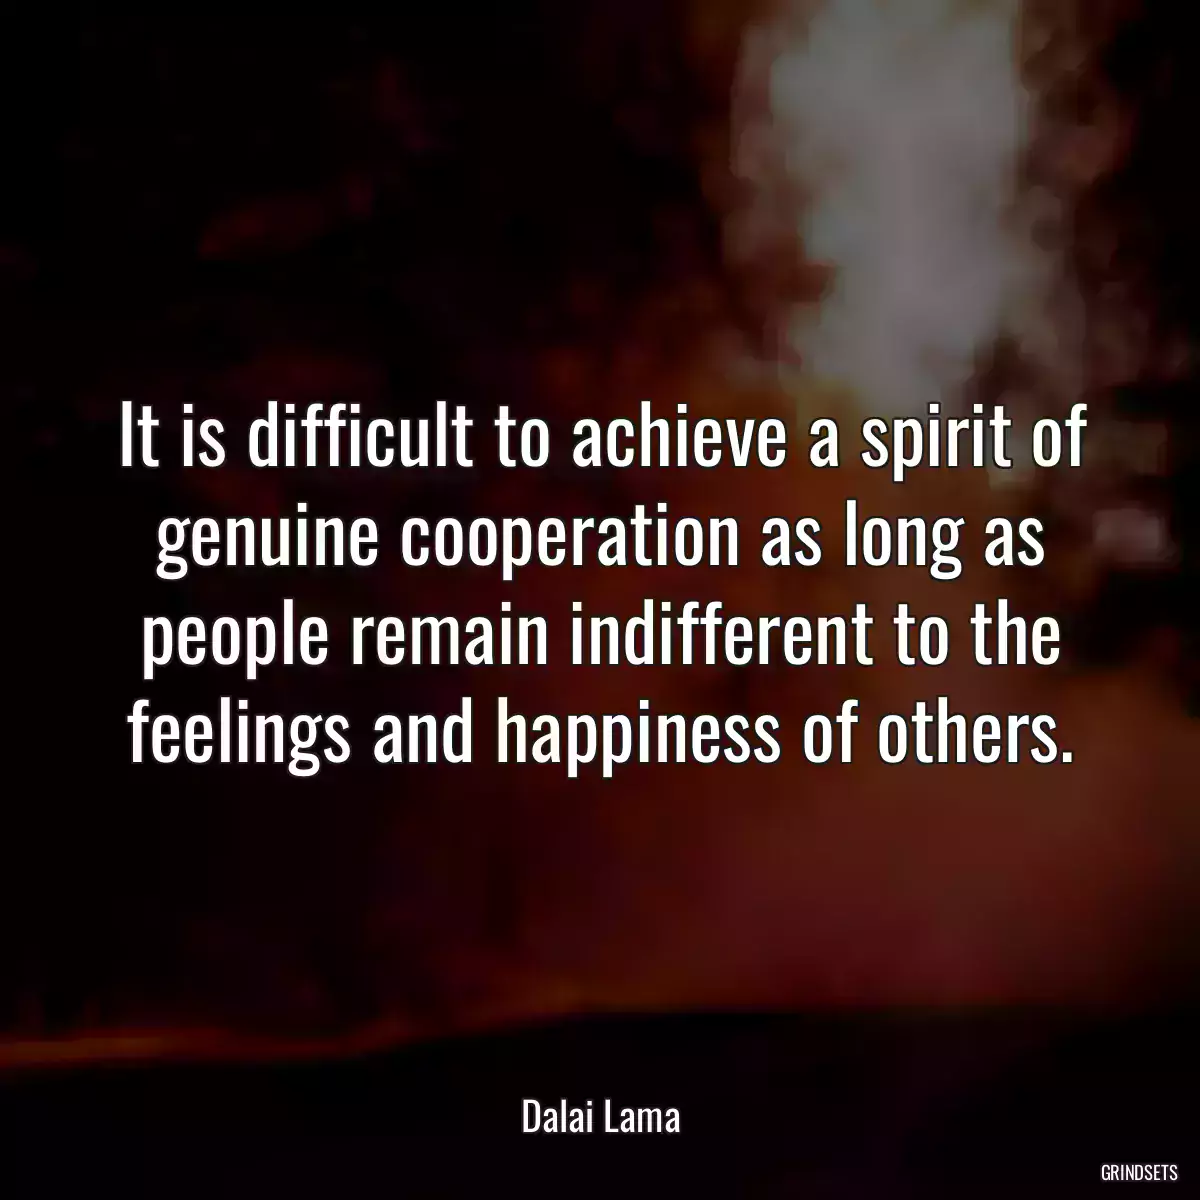 It is difficult to achieve a spirit of genuine cooperation as long as people remain indifferent to the feelings and happiness of others.